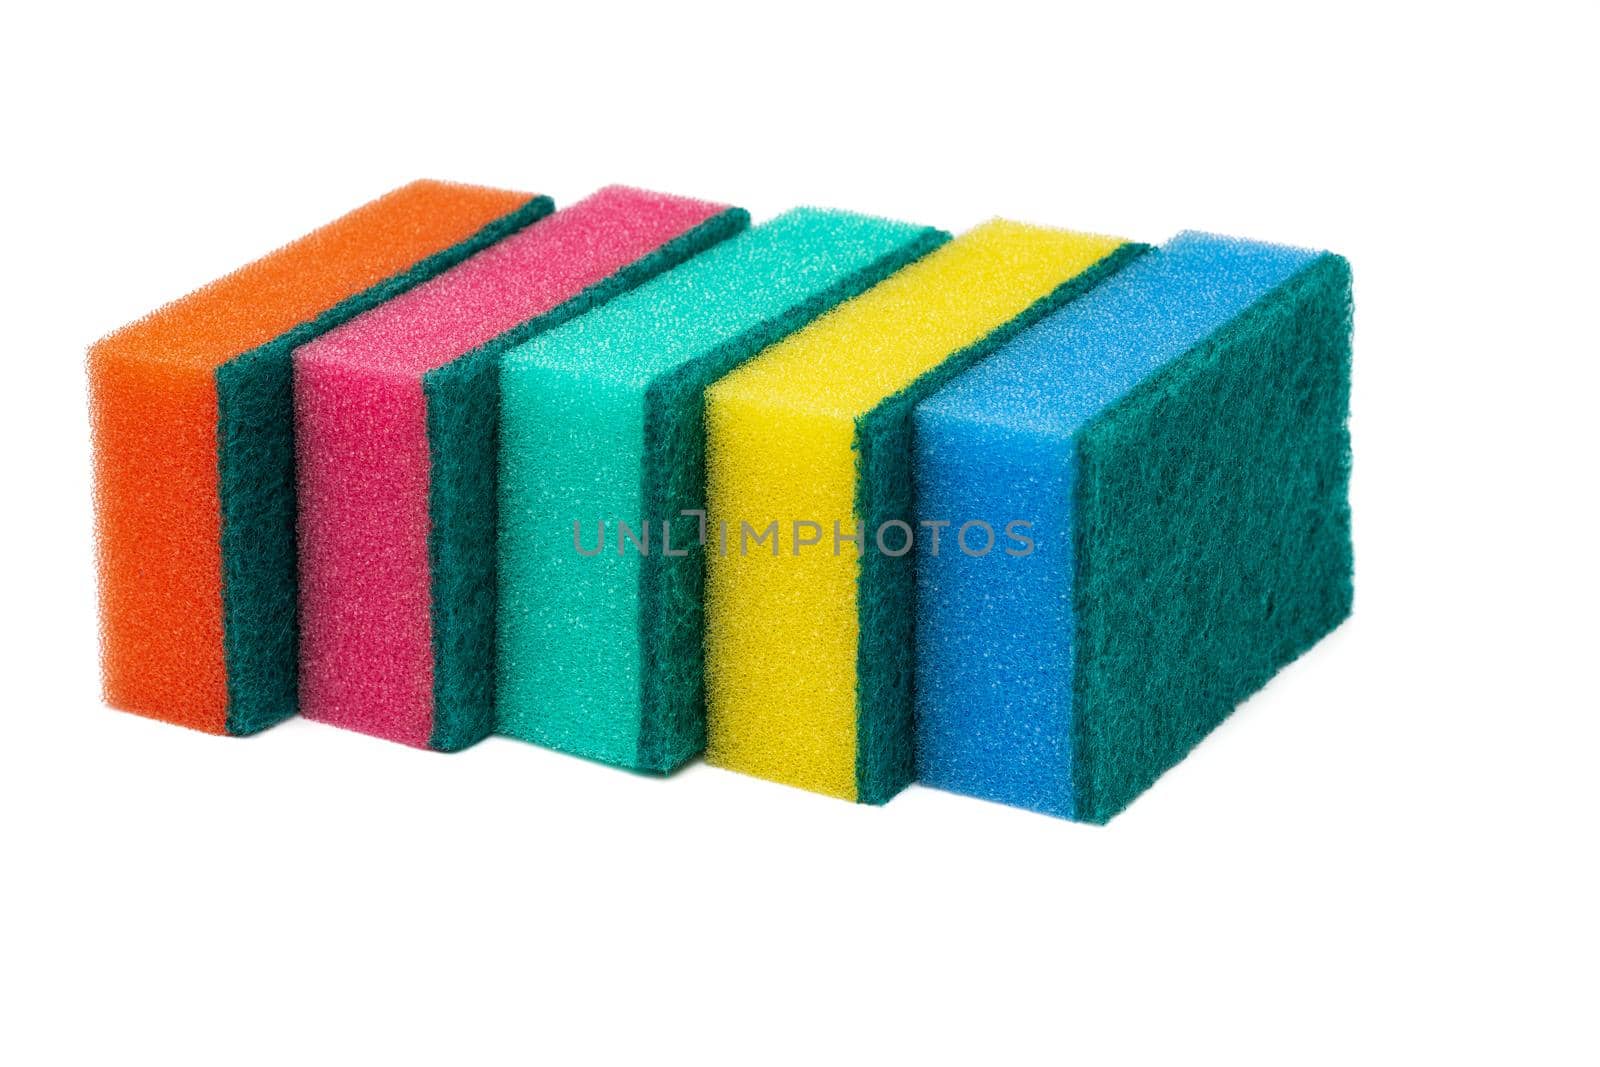 Group of foam sponges with abrasive material used by housewives who care about cleanliness in their favorite kitchen. Five orange, pink, green, yellow and blue colors sponges on white background